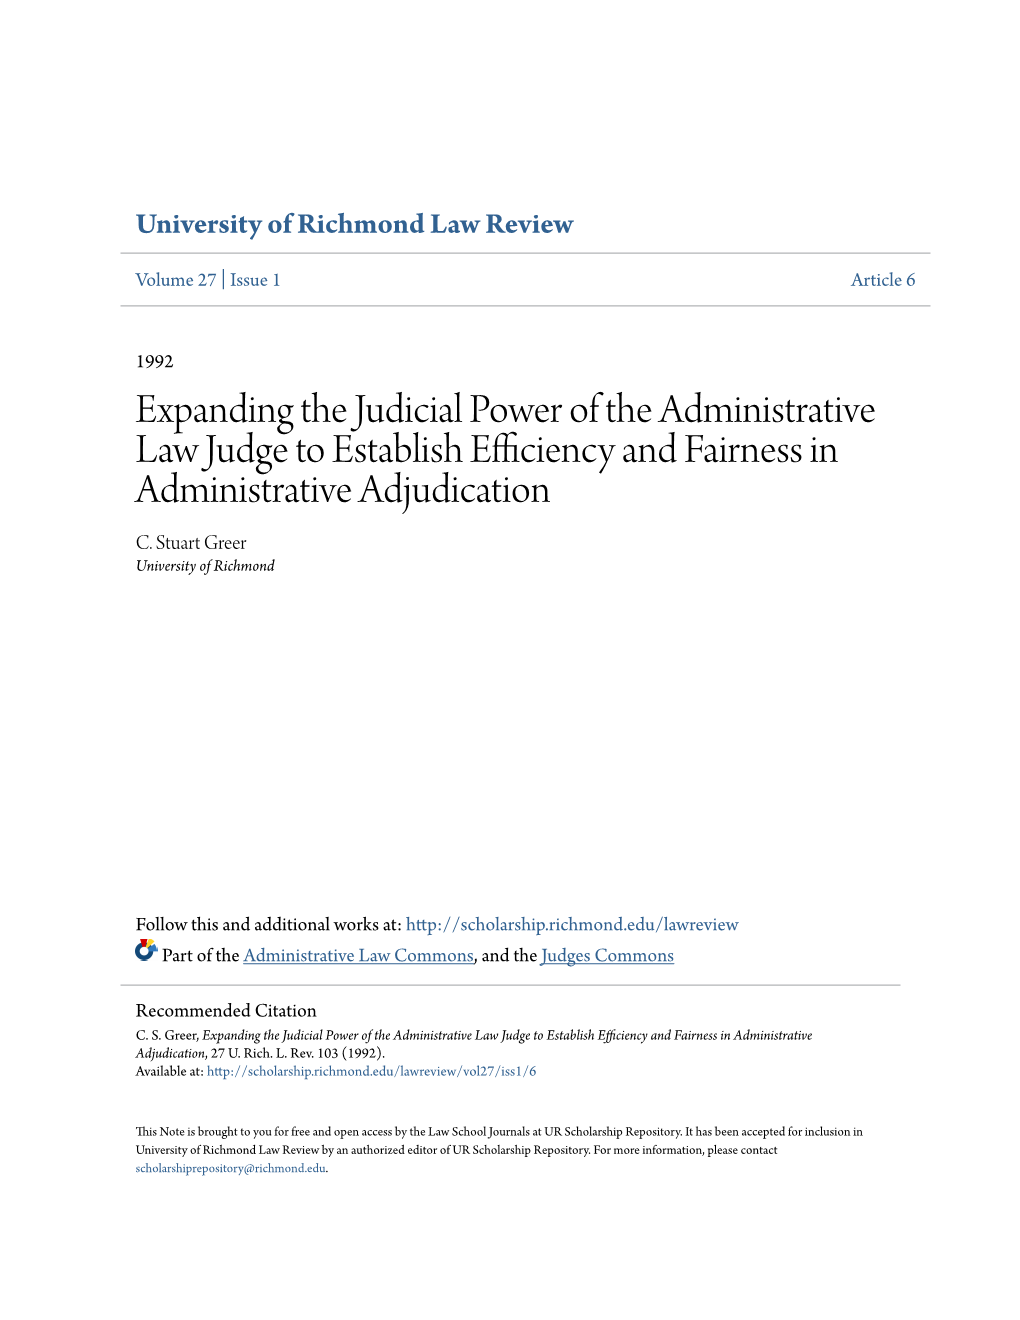 Expanding the Judicial Power of the Administrative Law Judge to Establish Efficiency and Fairness in Administrative Adjudication C